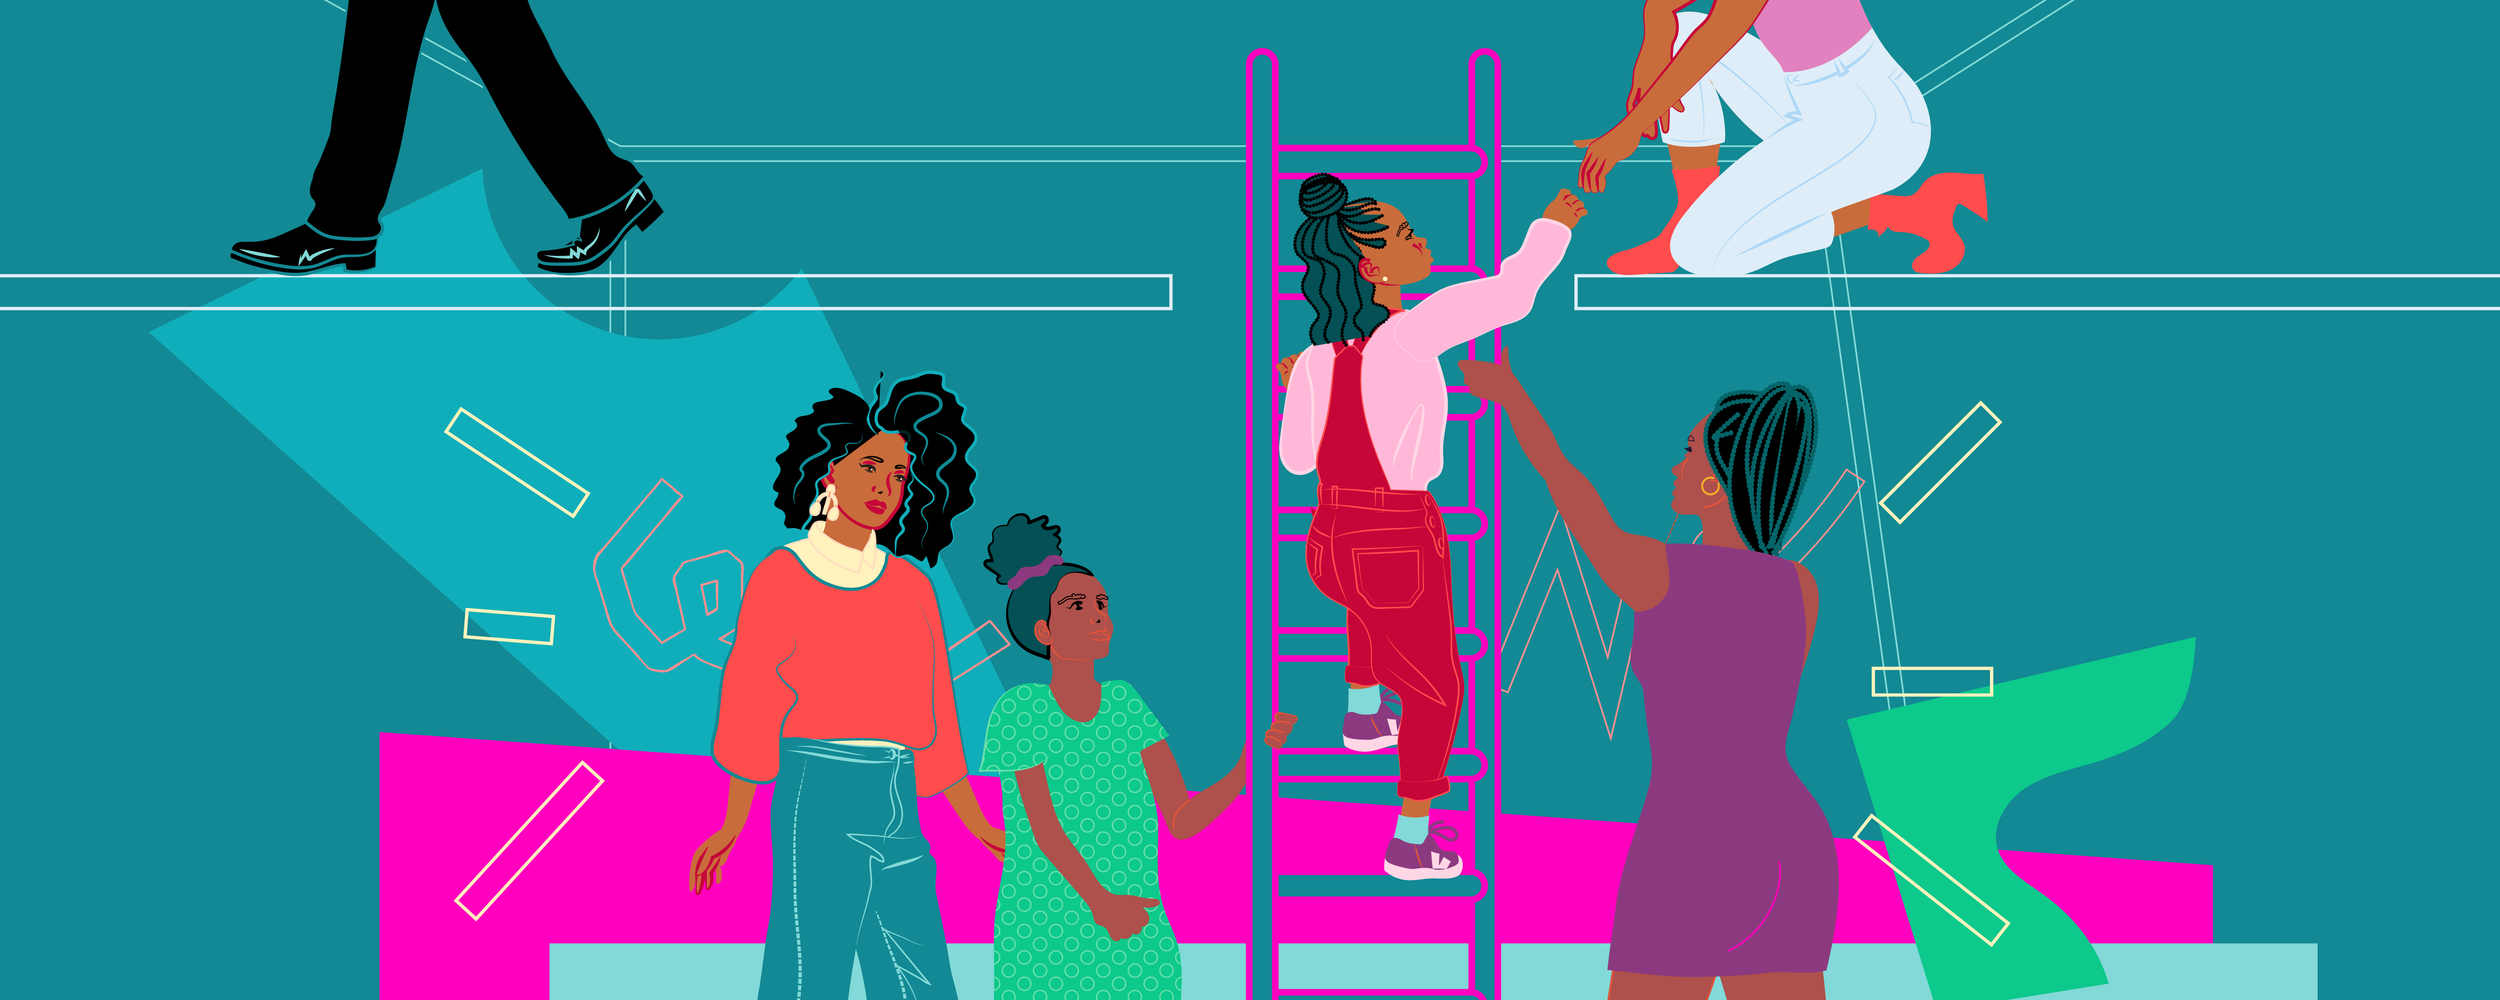 Poster - 2019/2/6/celebrate-black-history-month-with-lyft